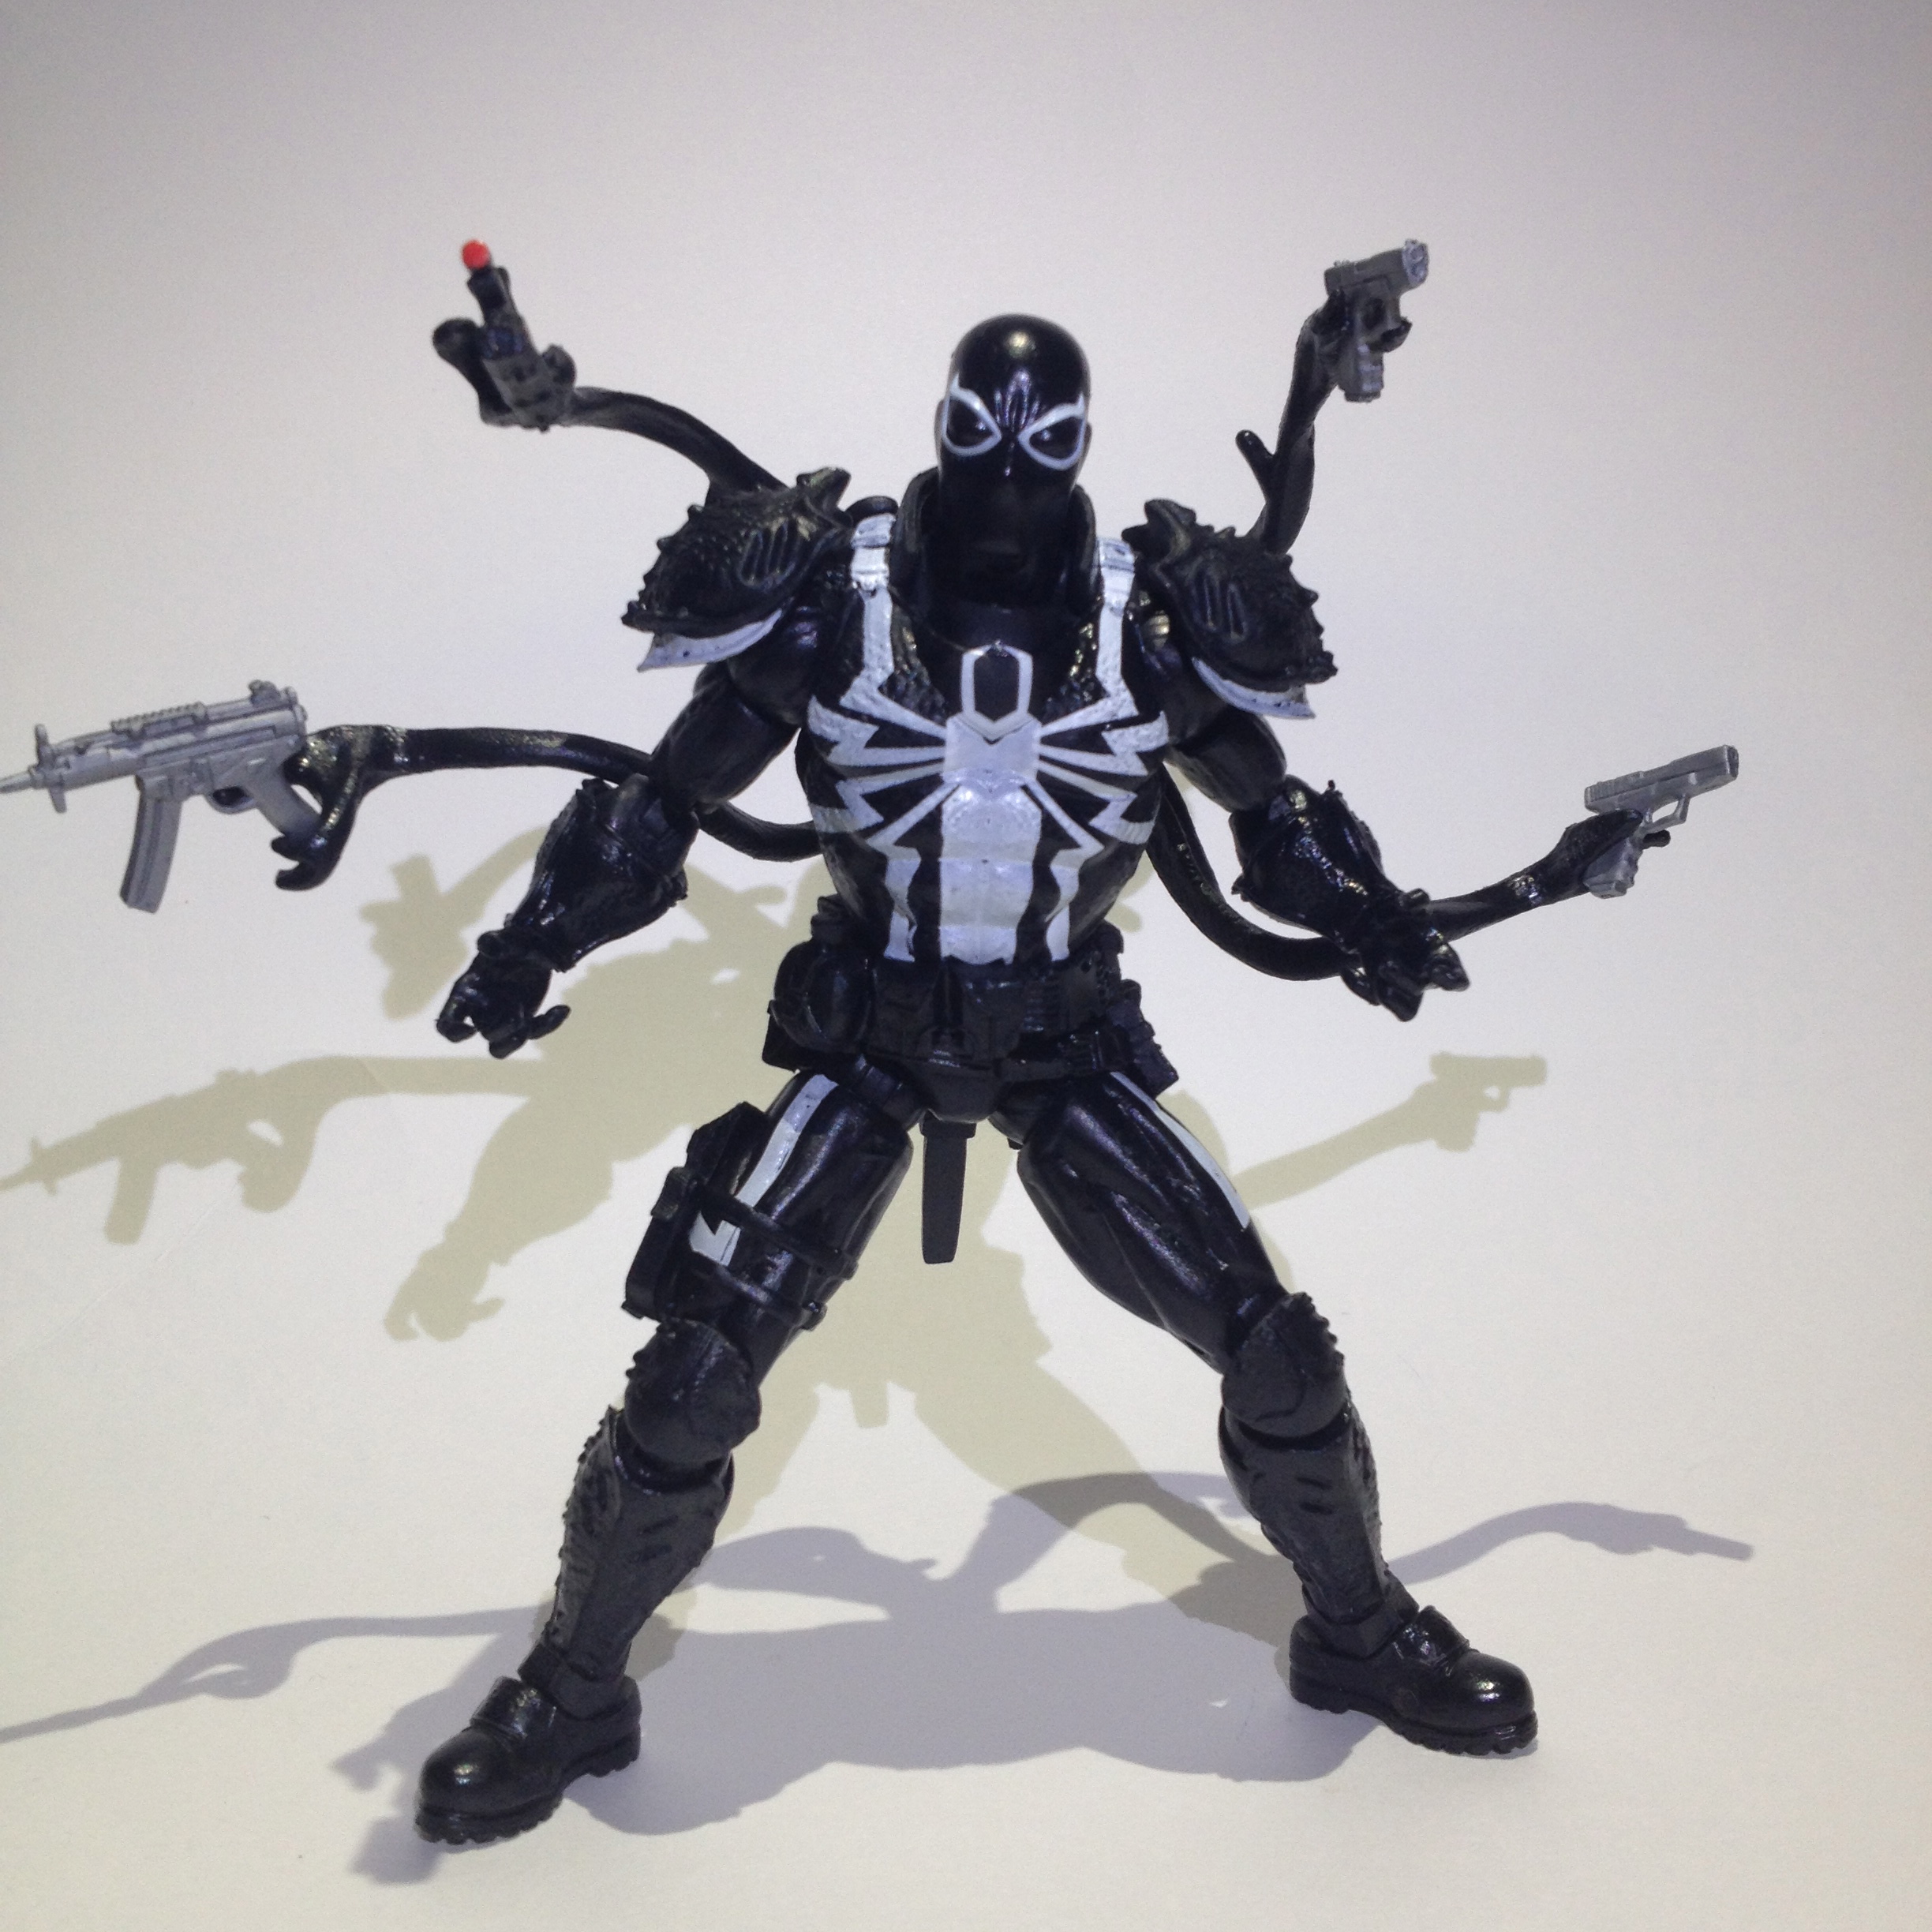 Agent Venom comes packed with a rather impressive accessory count, one that...